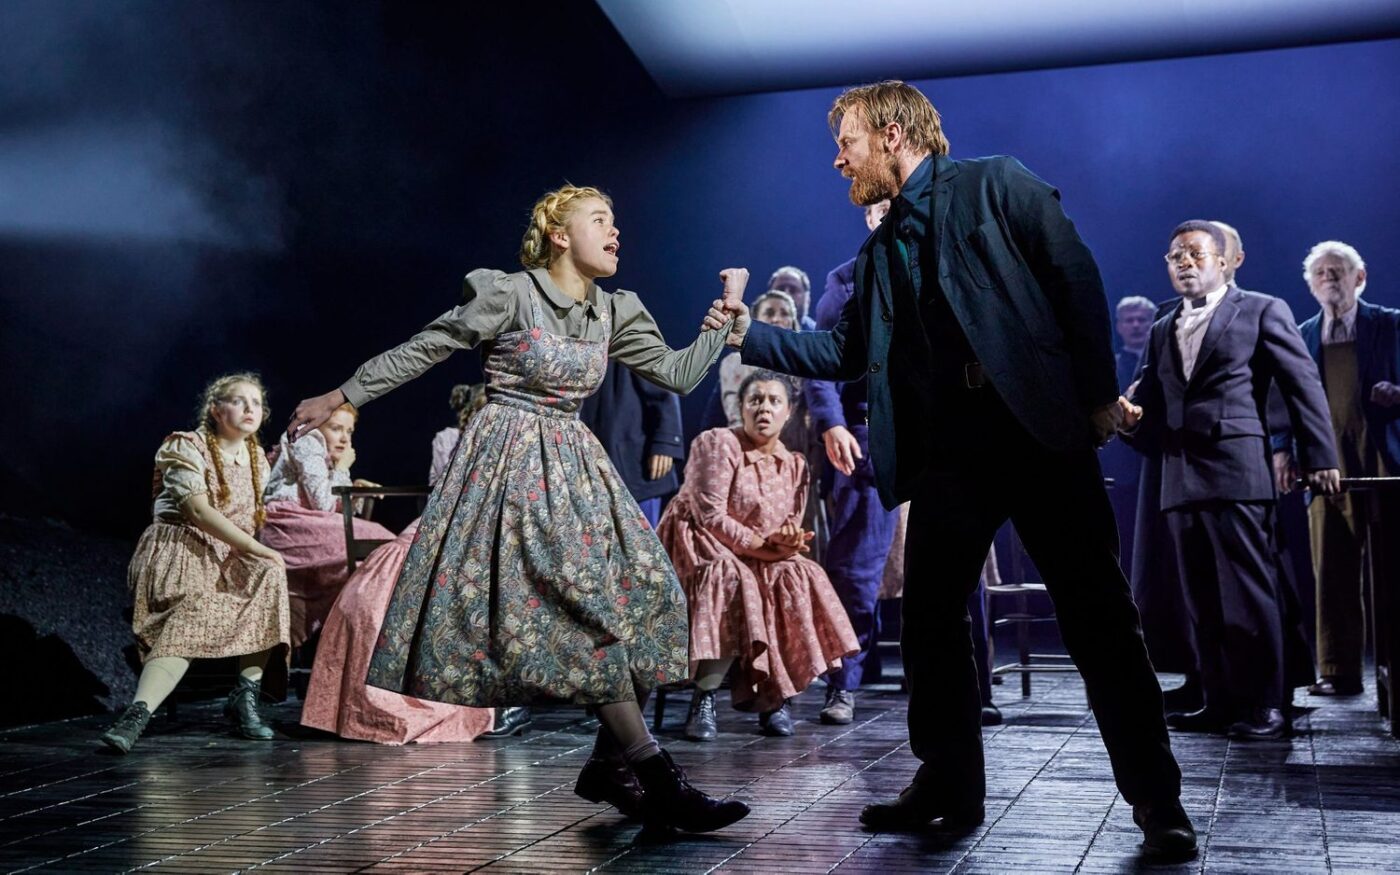 Milly-Alcock-Brian-Gleeson-and-cast-in-The-Crucible-west-end-Photo-Brinkhoff-Moegenburg